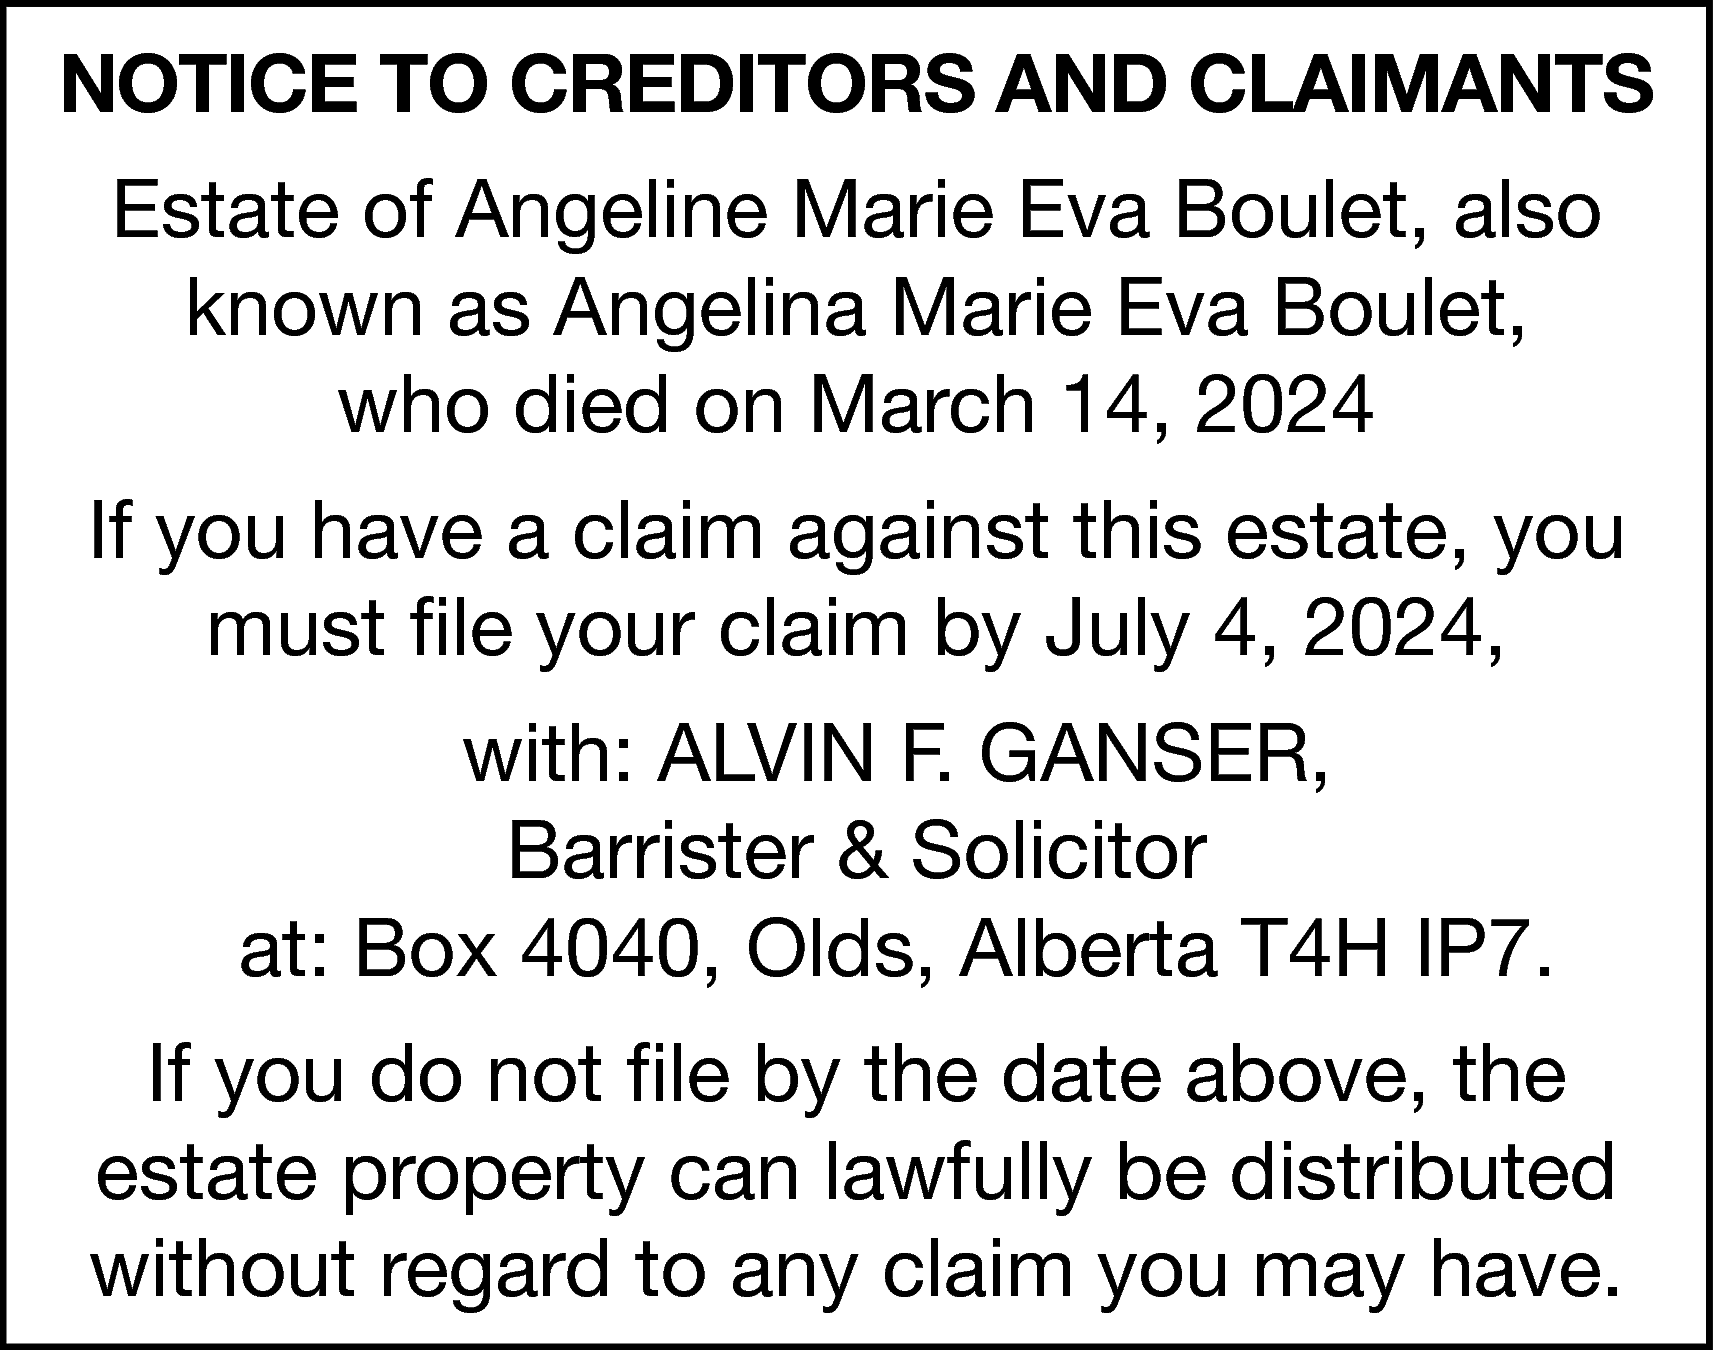 NOTICE TO CREDITORS AND CLAIMANTS  NOTICE TO CREDITORS AND CLAIMANTS  Estate of Angeline Marie Eva Boulet, also  known as Angelina Marie Eva Boulet,  who died on March 14, 2024  If you have a claim against this estate, you  must file your claim by July 4, 2024,  with: ALVIN F. GANSER,  Barrister & Solicitor  at: Box 4040, Olds, Alberta T4H IP7.  If you do not file by the date above, the  estate property can lawfully be distributed  without regard to any claim you may have.    